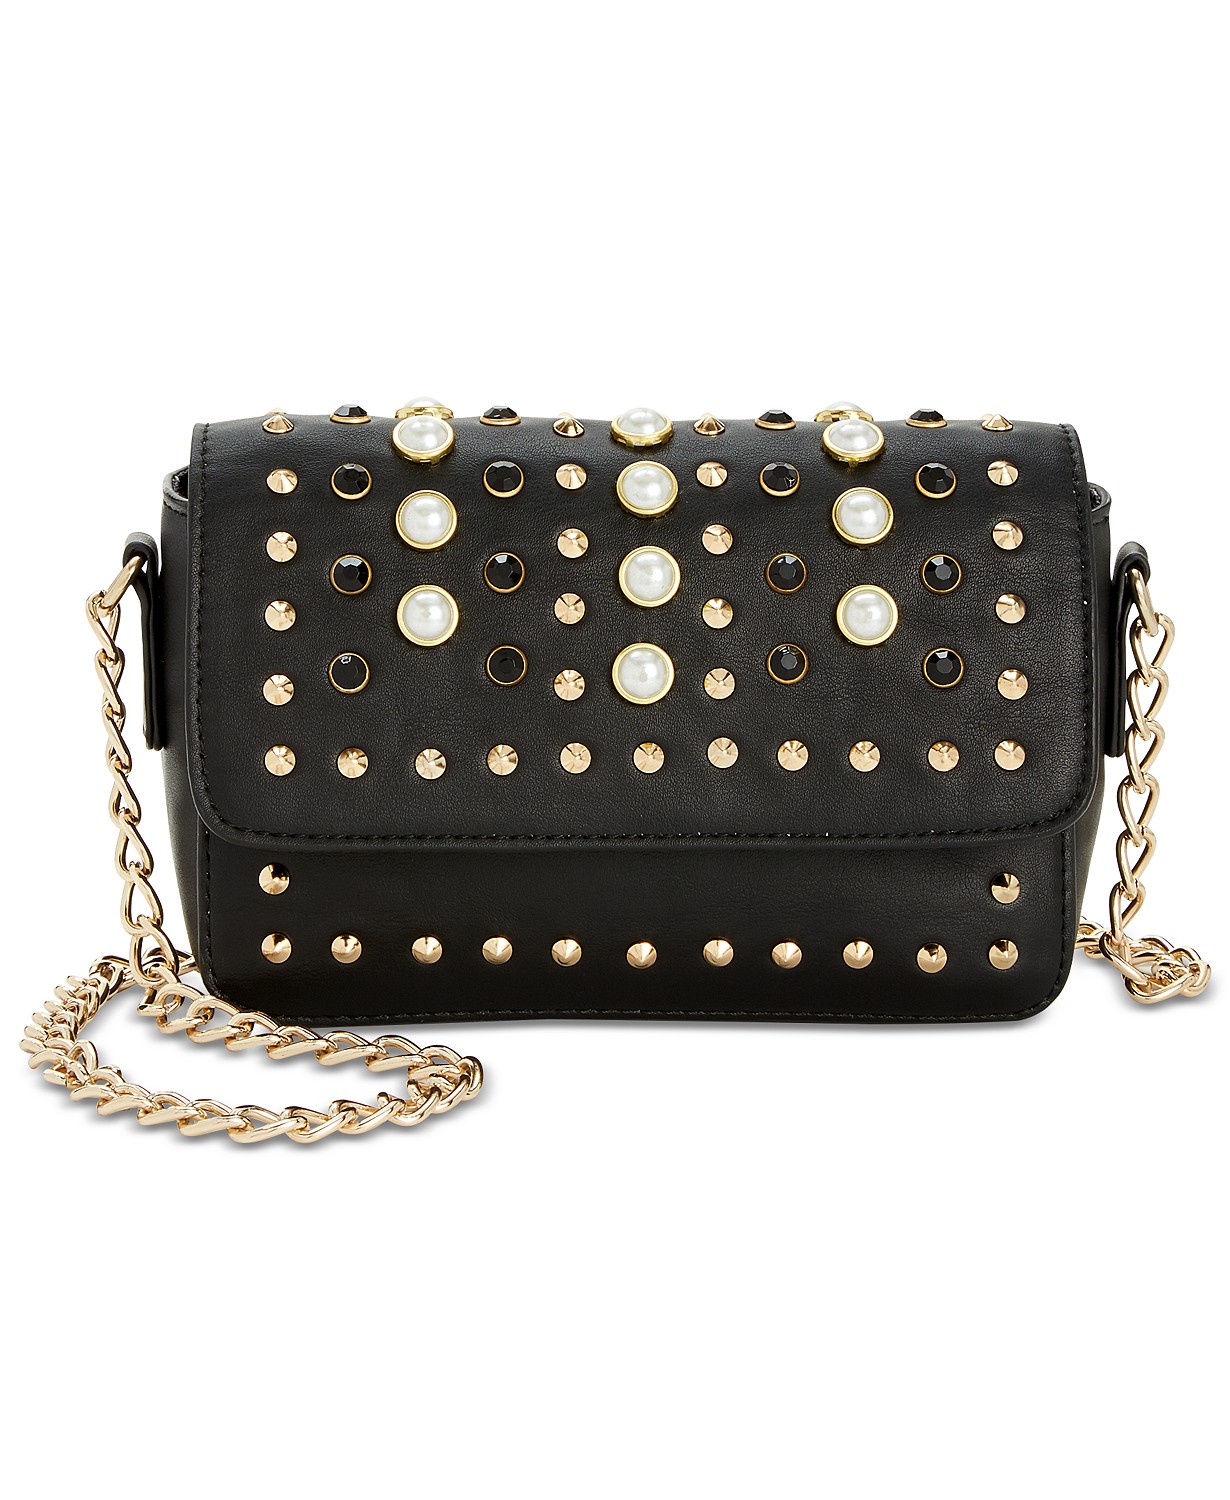 www.couturepoint.com-steve-madden-aiden-embellished-flapover-crossbody-bag